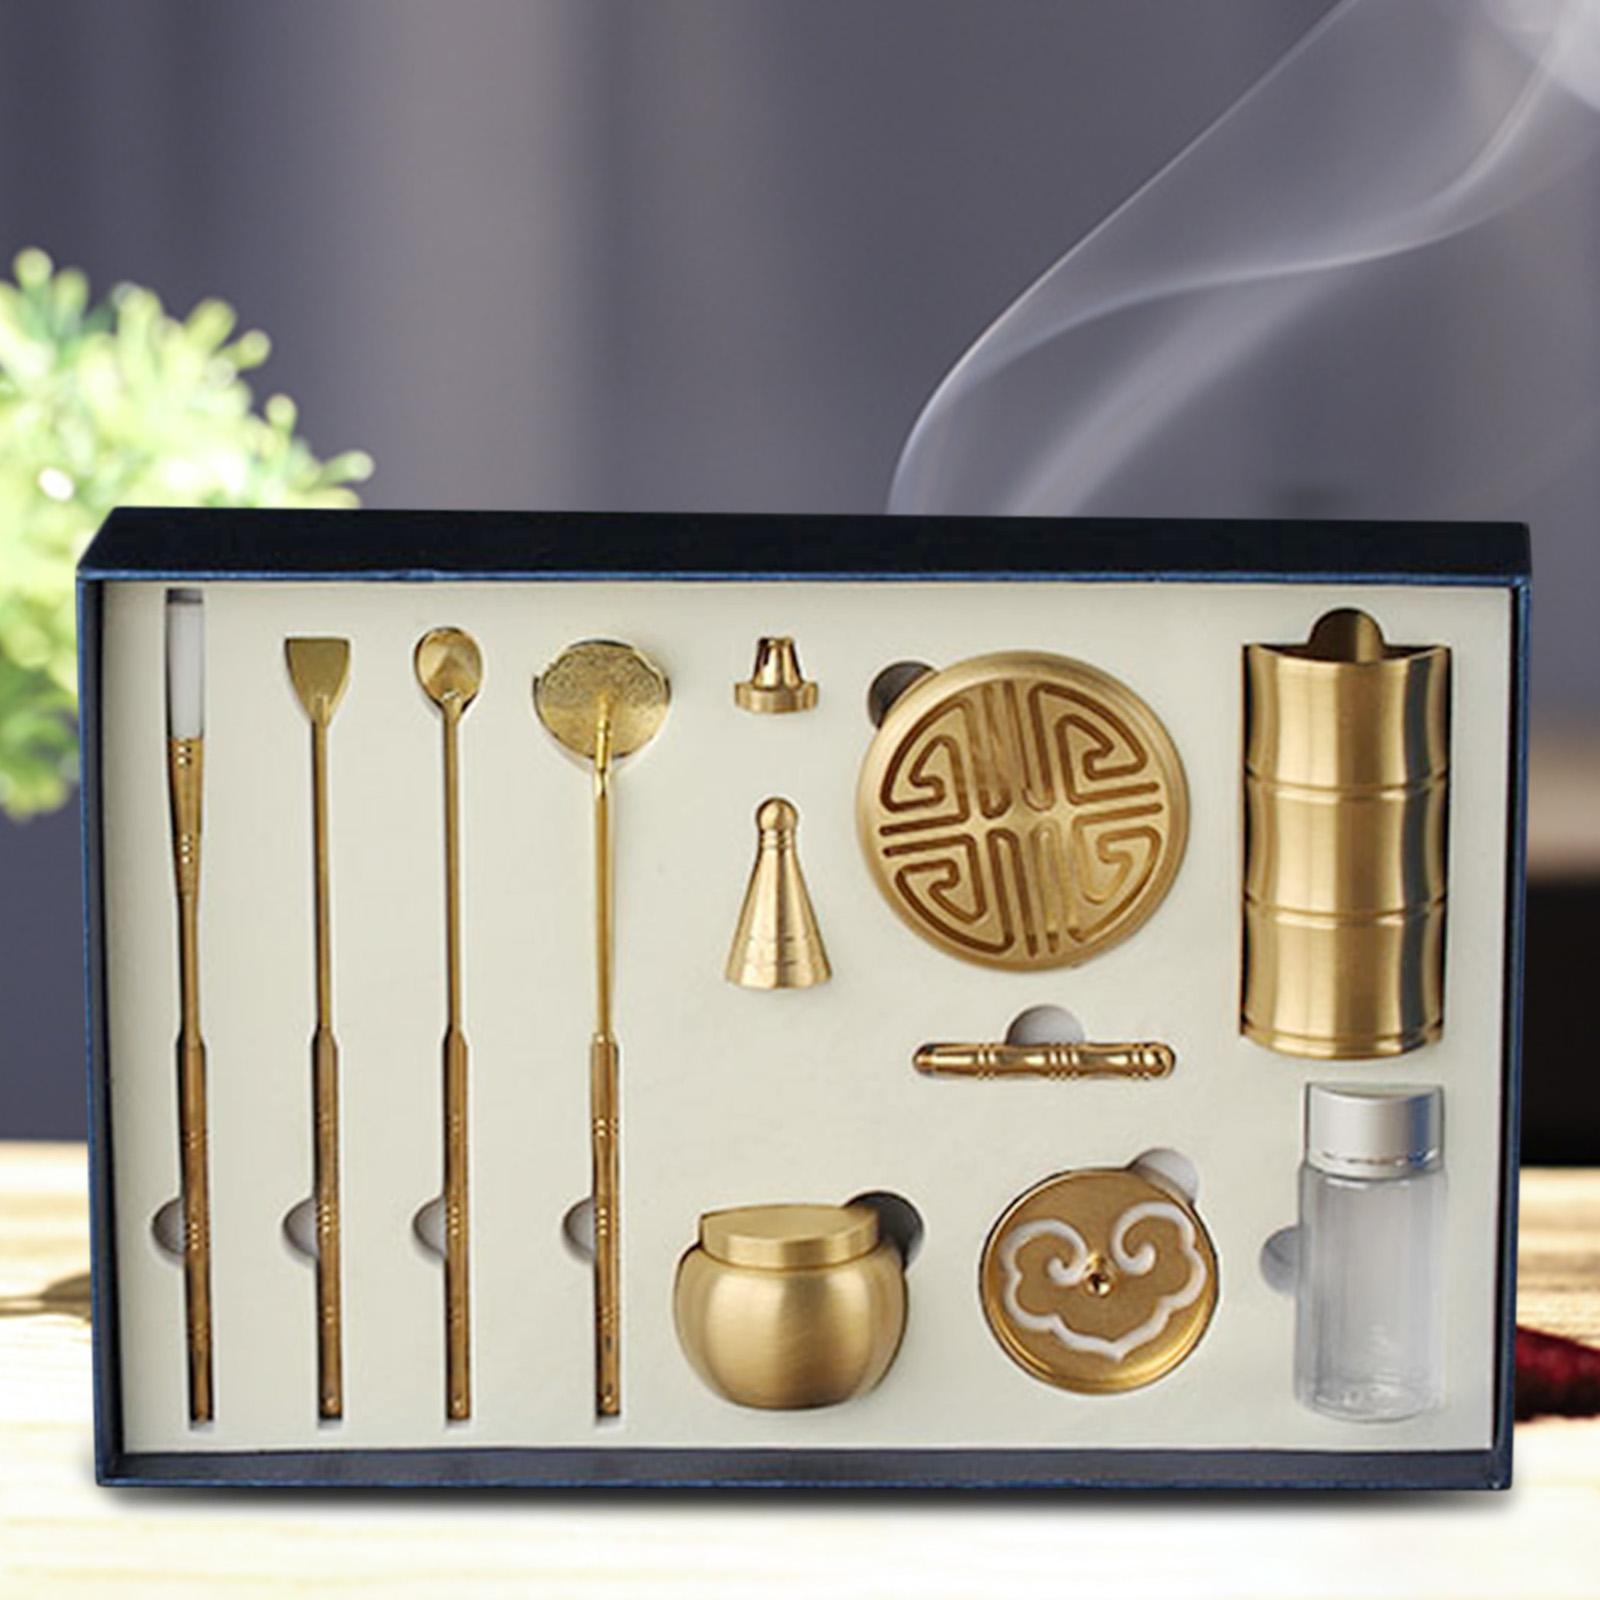 Incense Road Set Making Appliances Introductory for Temple Decor Longevity